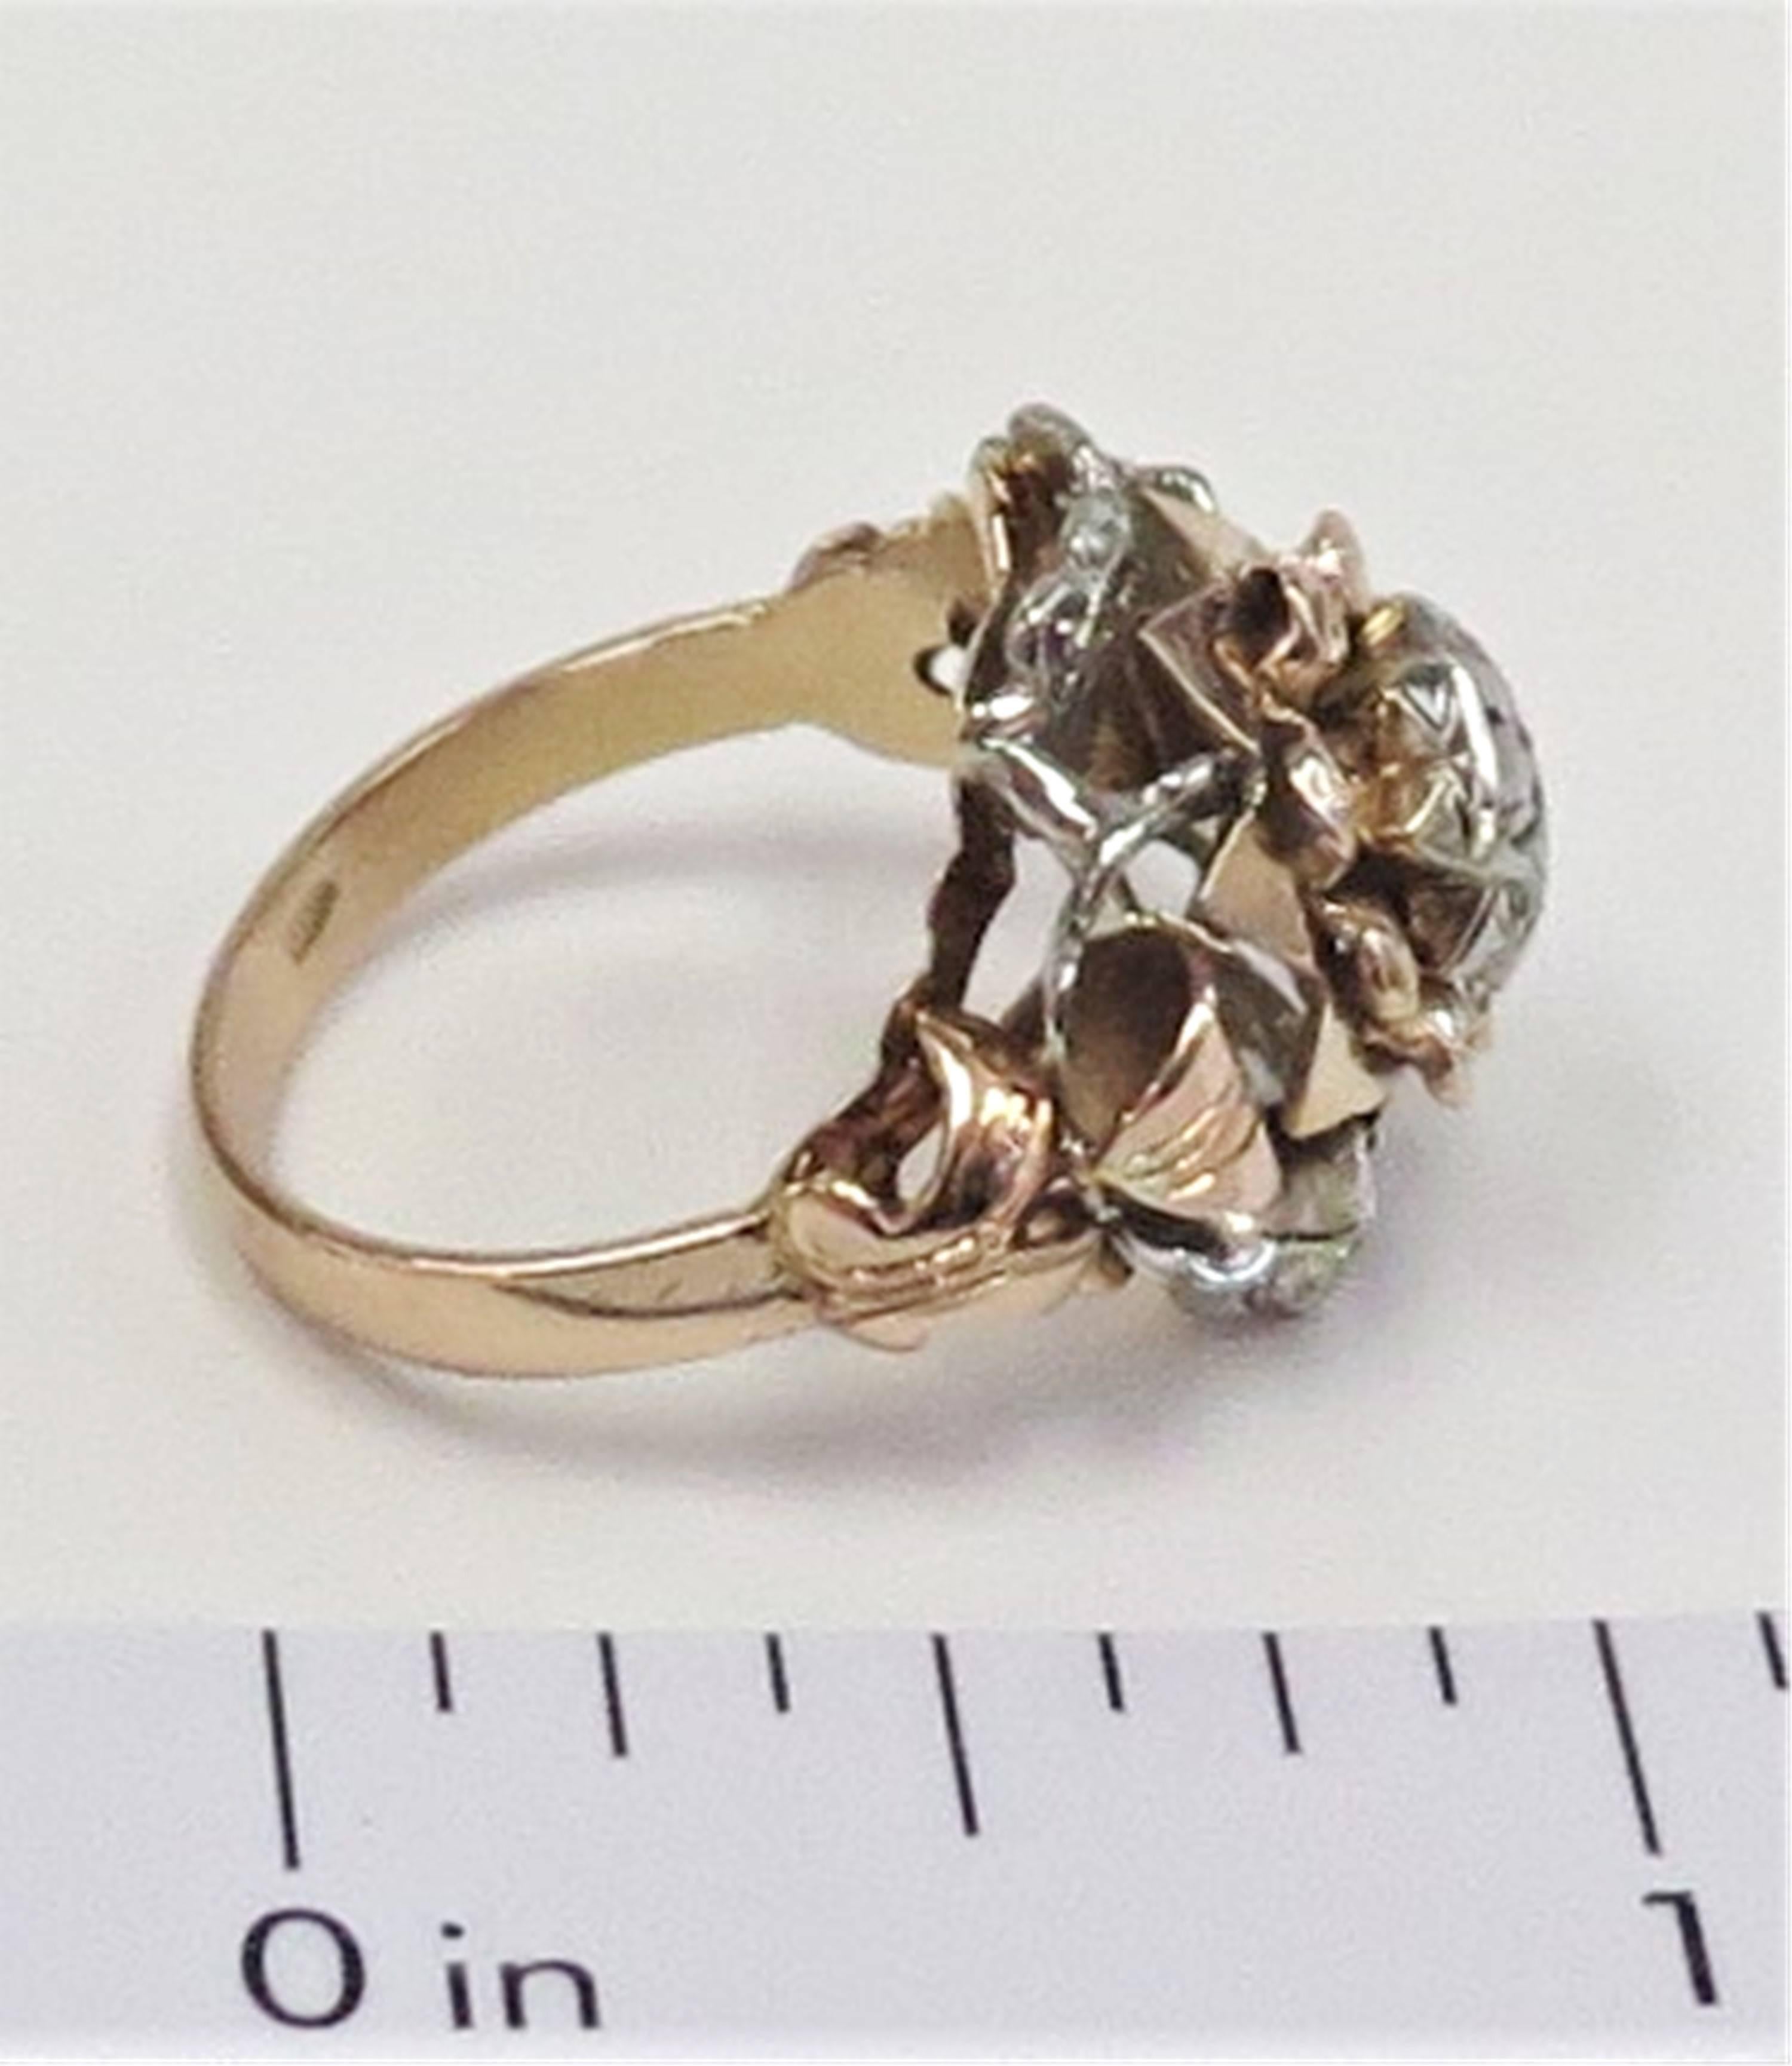 1920s White and Rose Gold Ring with Centre Rose Cut Diamond / 18 karat 4